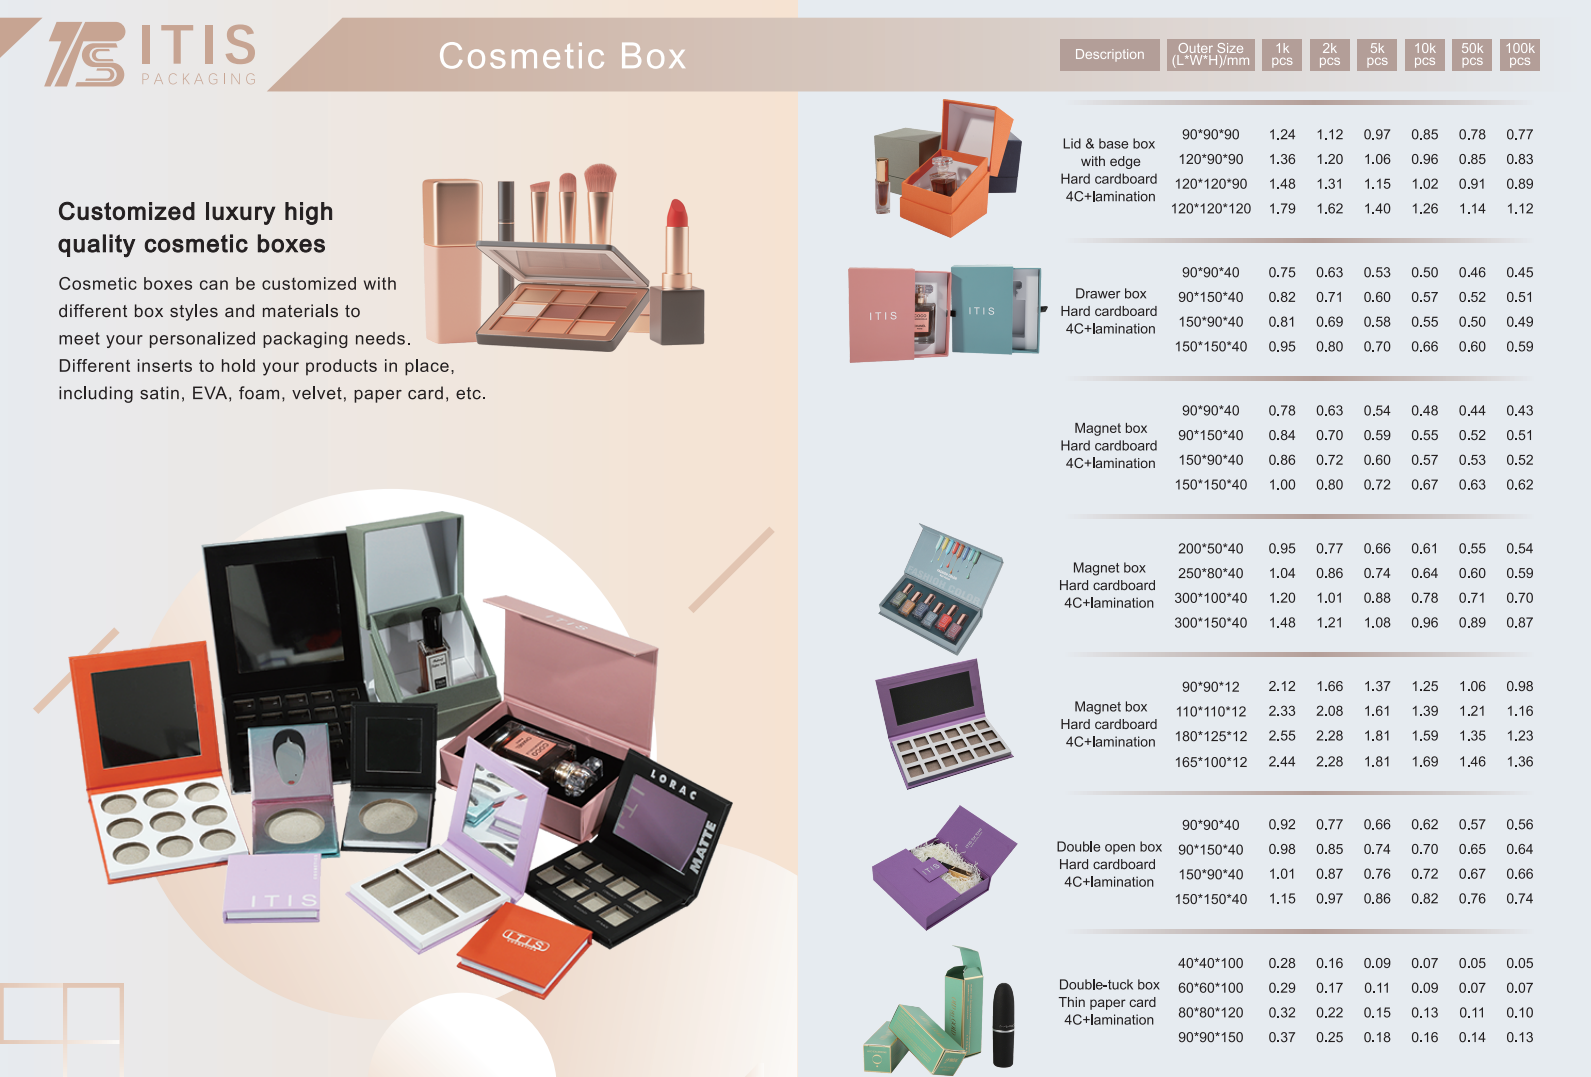 the cosmetic boxes